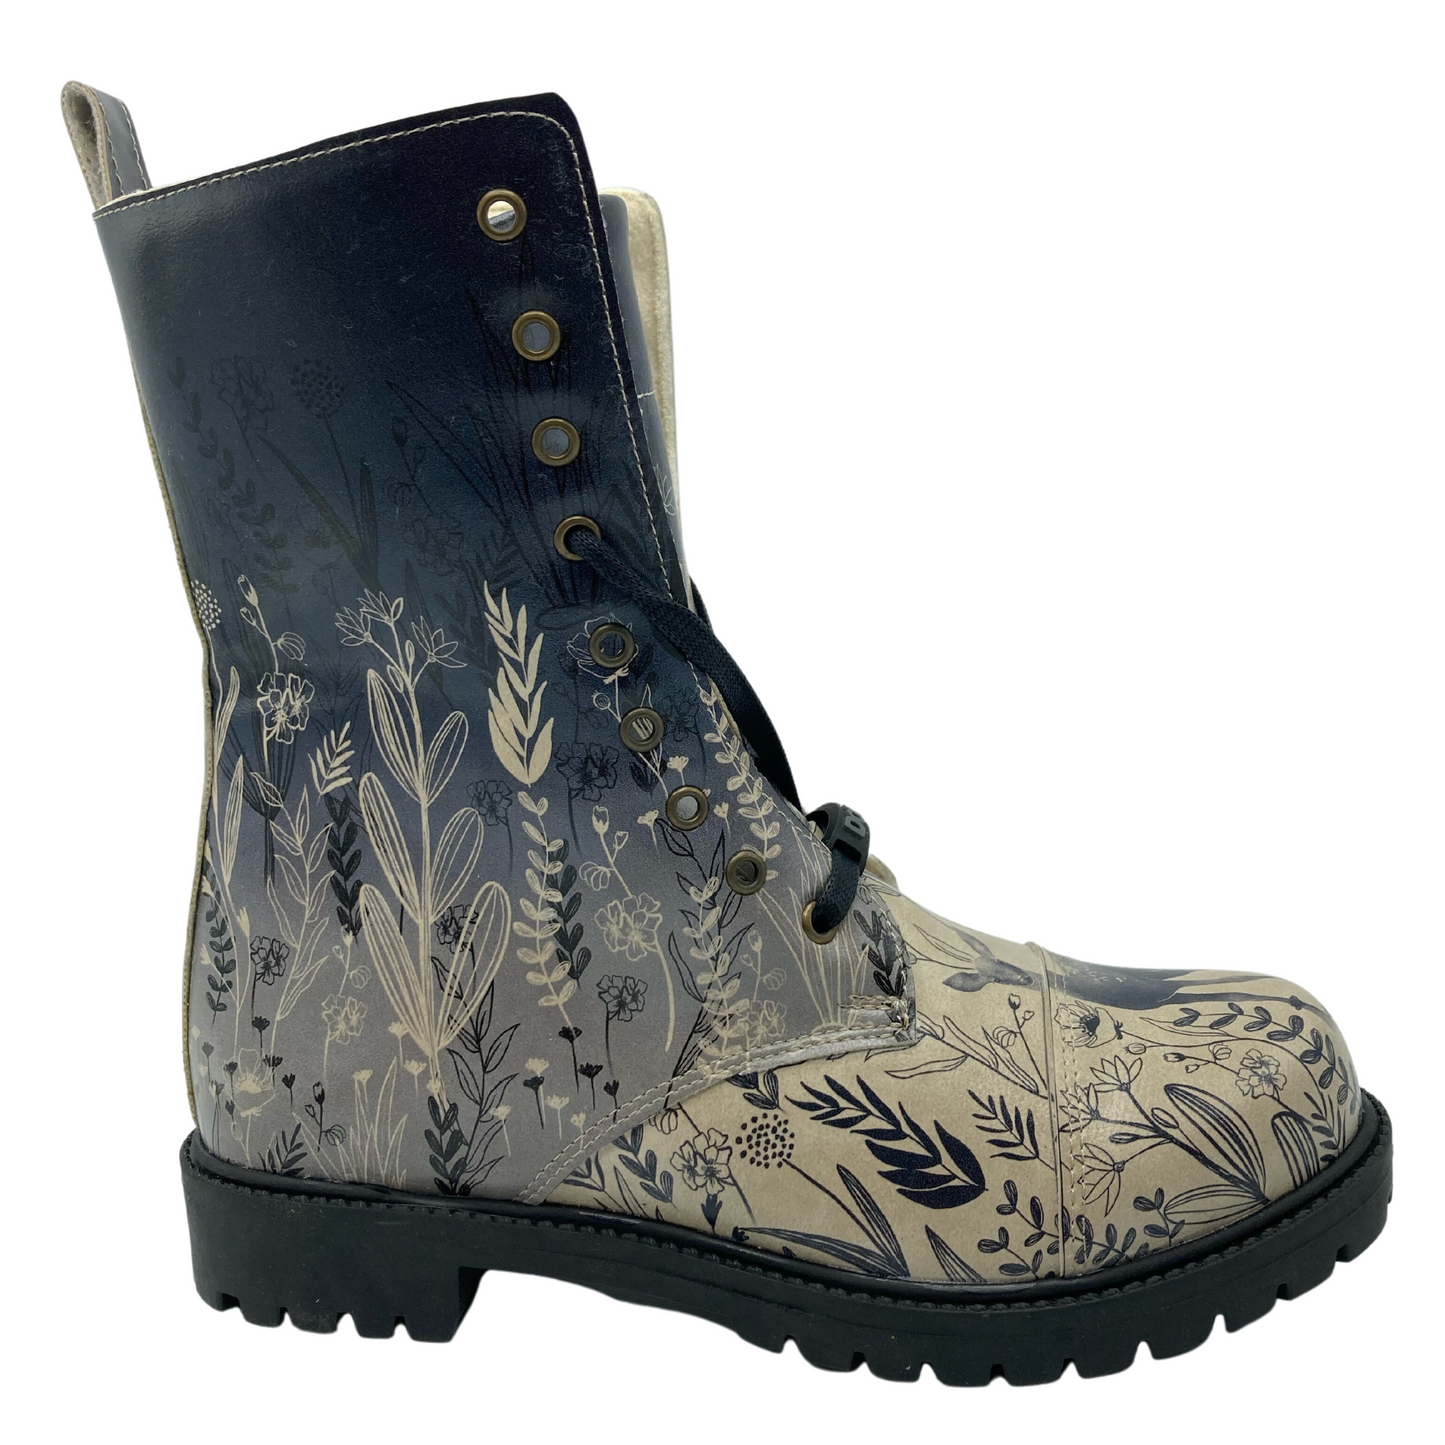 Right facing view of vegan leather combat boot with ombre floral pattern and lace up upper